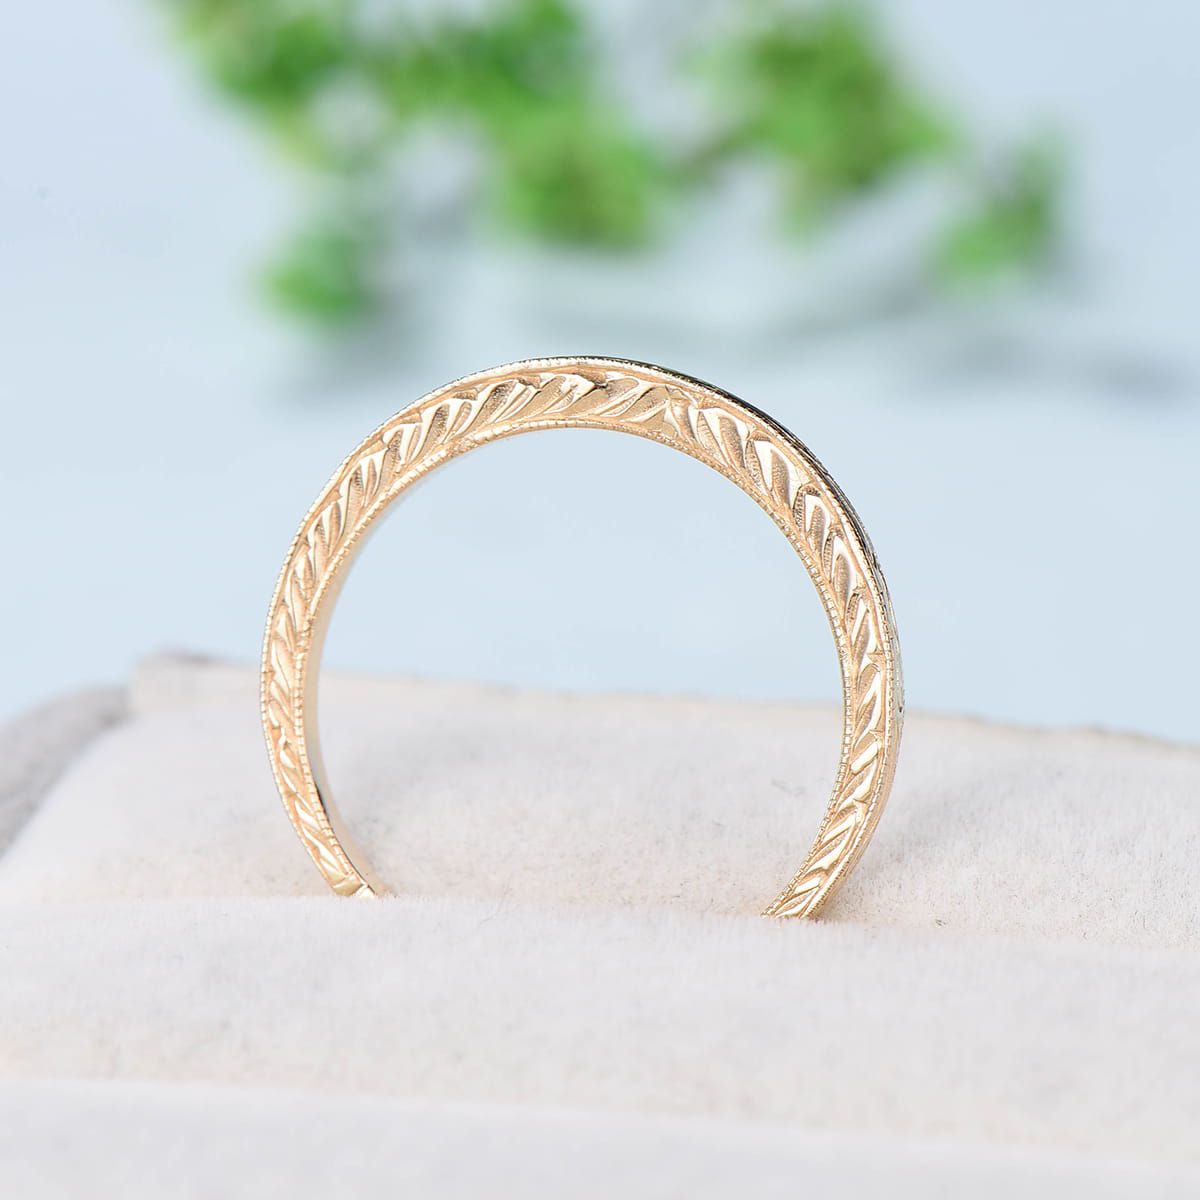 14k Yellow Gold 5mm Plain Wedding Band Ring Size 8.5 Jewelry Gifts for Women  - 3.5 Grams - Walmart.com